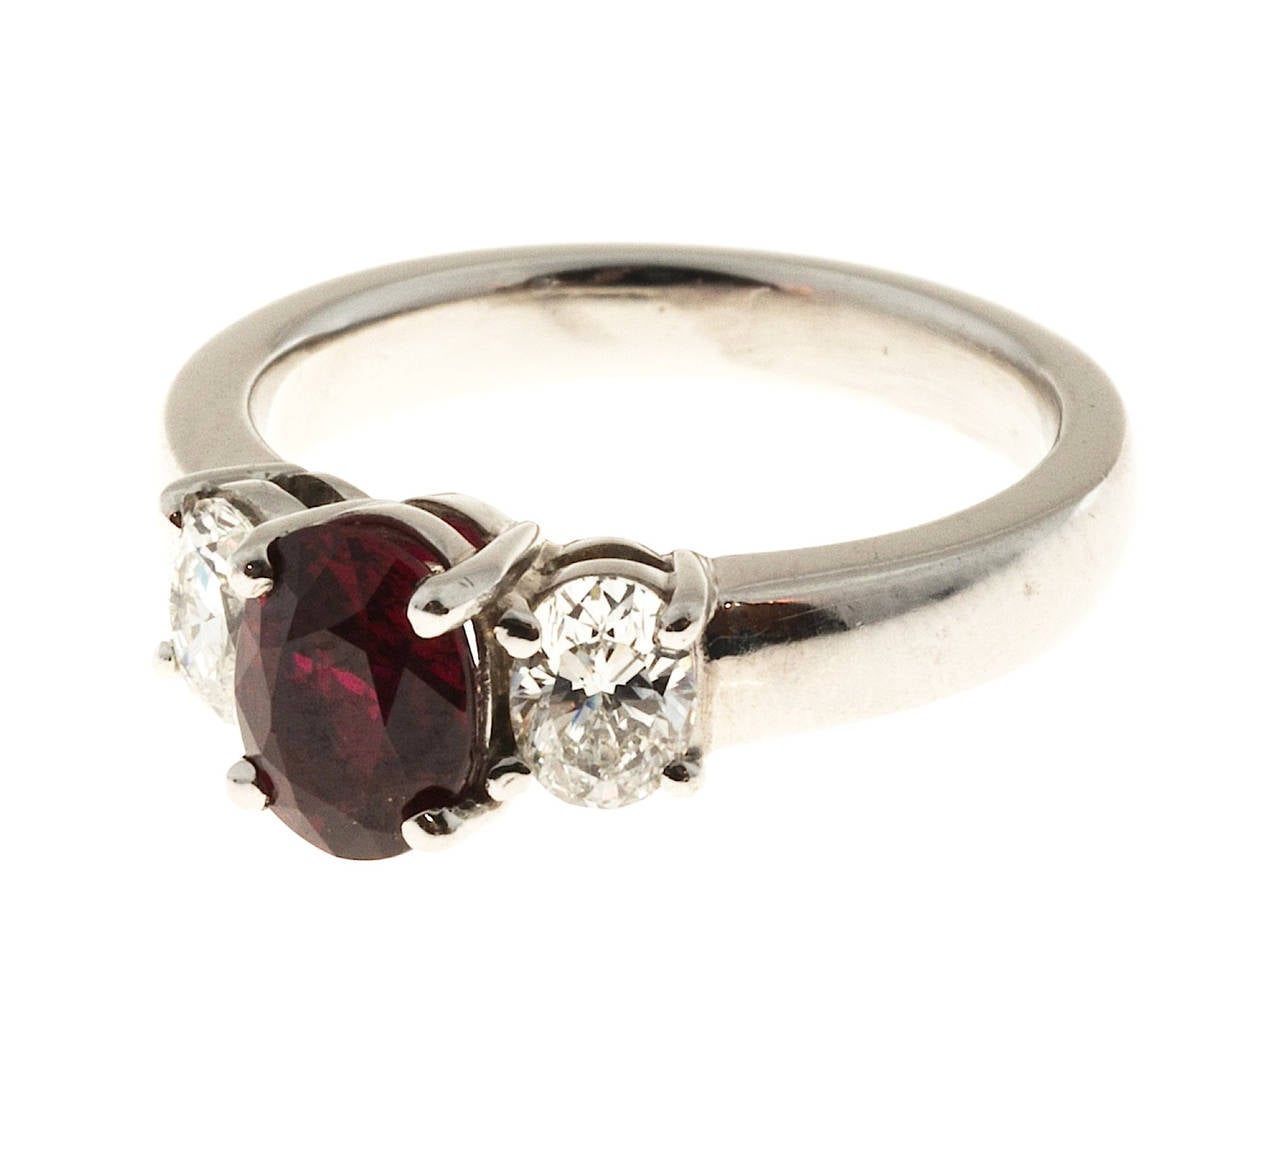 Extremely fine and rare 1.40ct pure red oval Ruby certified as natural no heat and no enhancements. Handmade solid Platinum ring with beautiful fine white side oval diamonds.

1.40ct GIA certified #1142531542 oval genuine natural no heat top gem